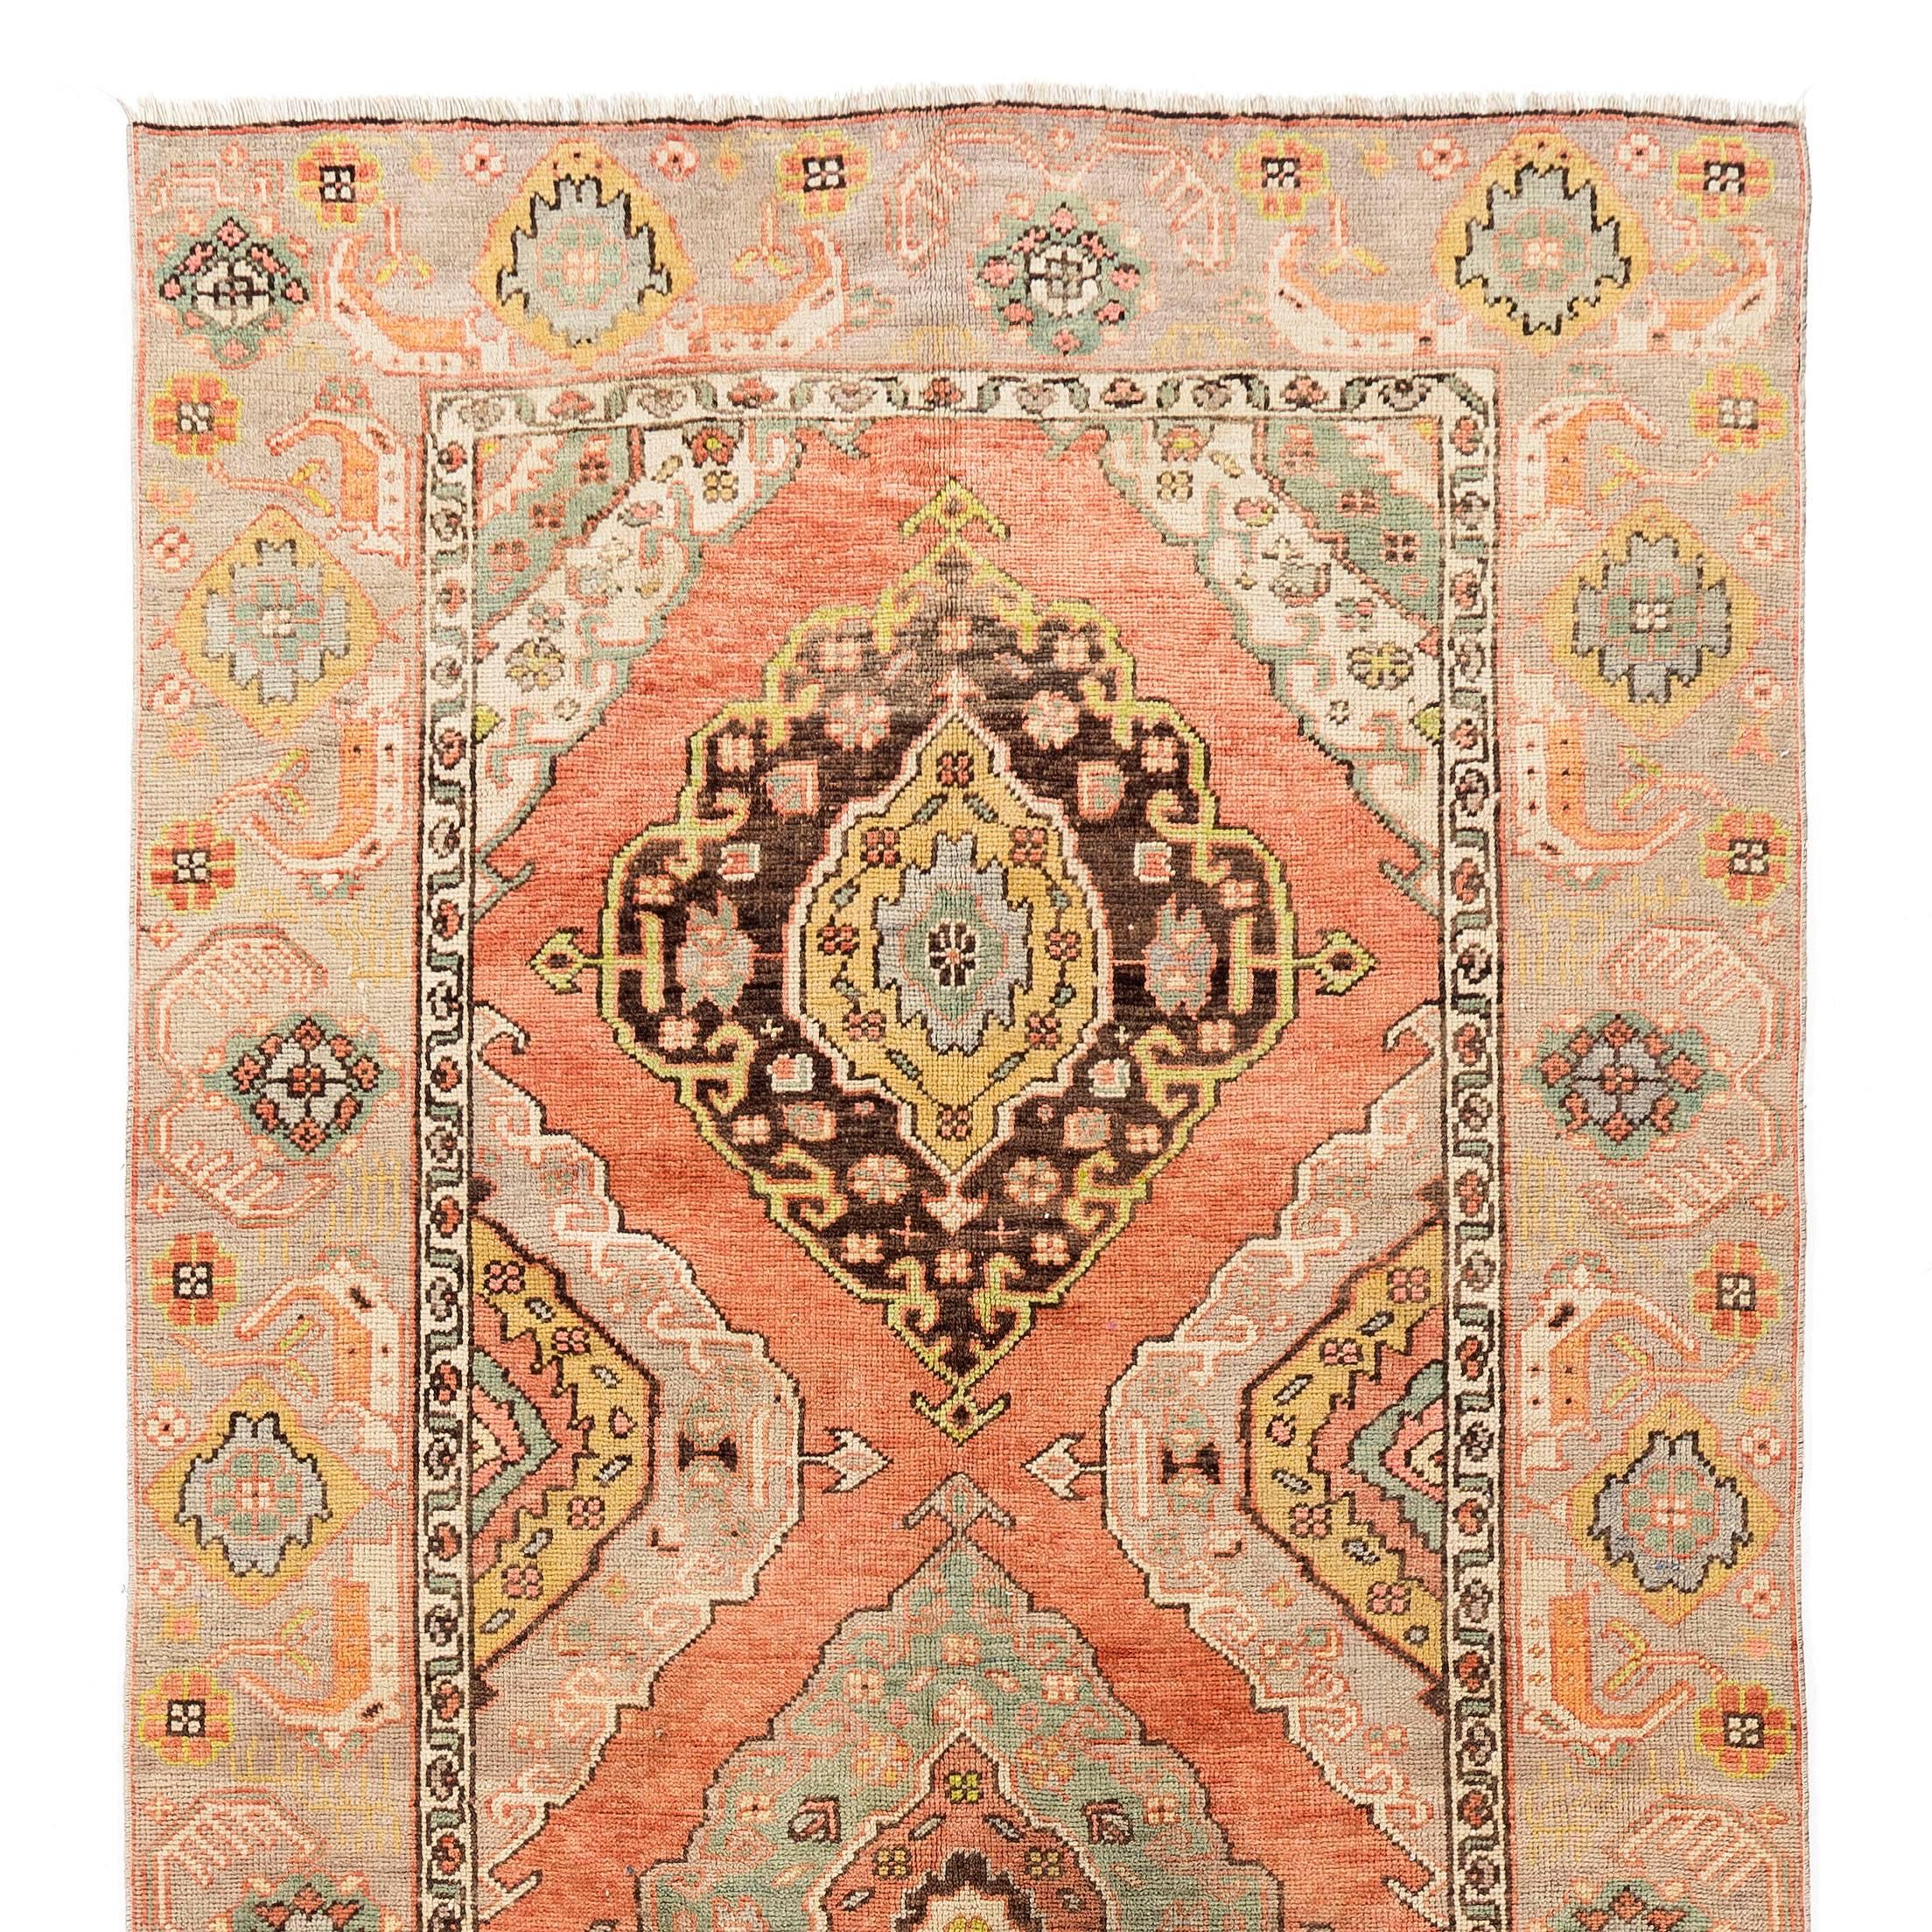 An early 20th century hand-knotted runner from Central Anatolia with pleasing natural colors and soft wool pile on wool foundation. Very good condition, sturdy and as clean as a brand new rug.